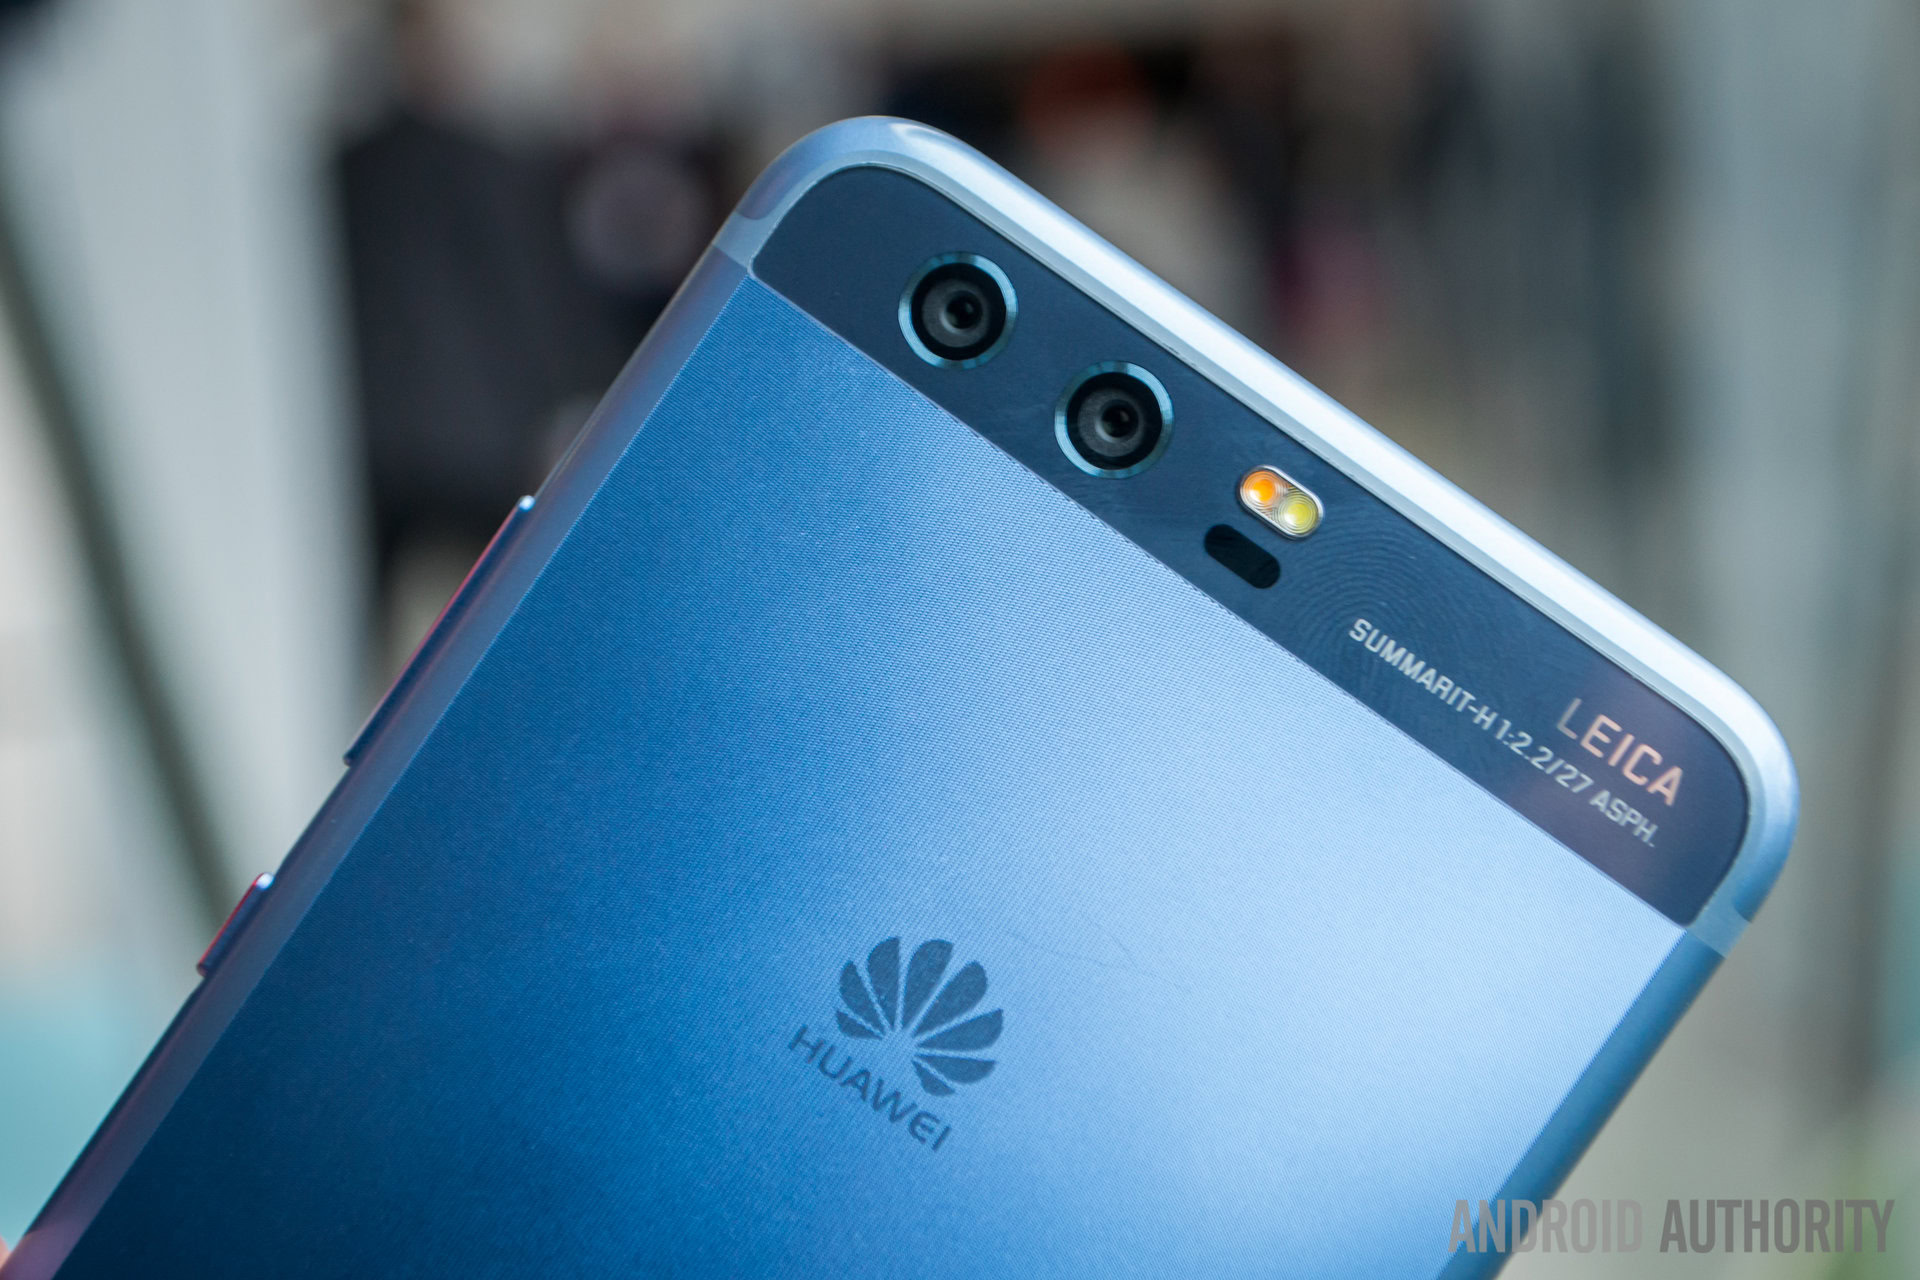 Specialiseren Lee een schuldeiser Huawei P10 and P10 Plus Android 8.0 Oreo update rolling out now